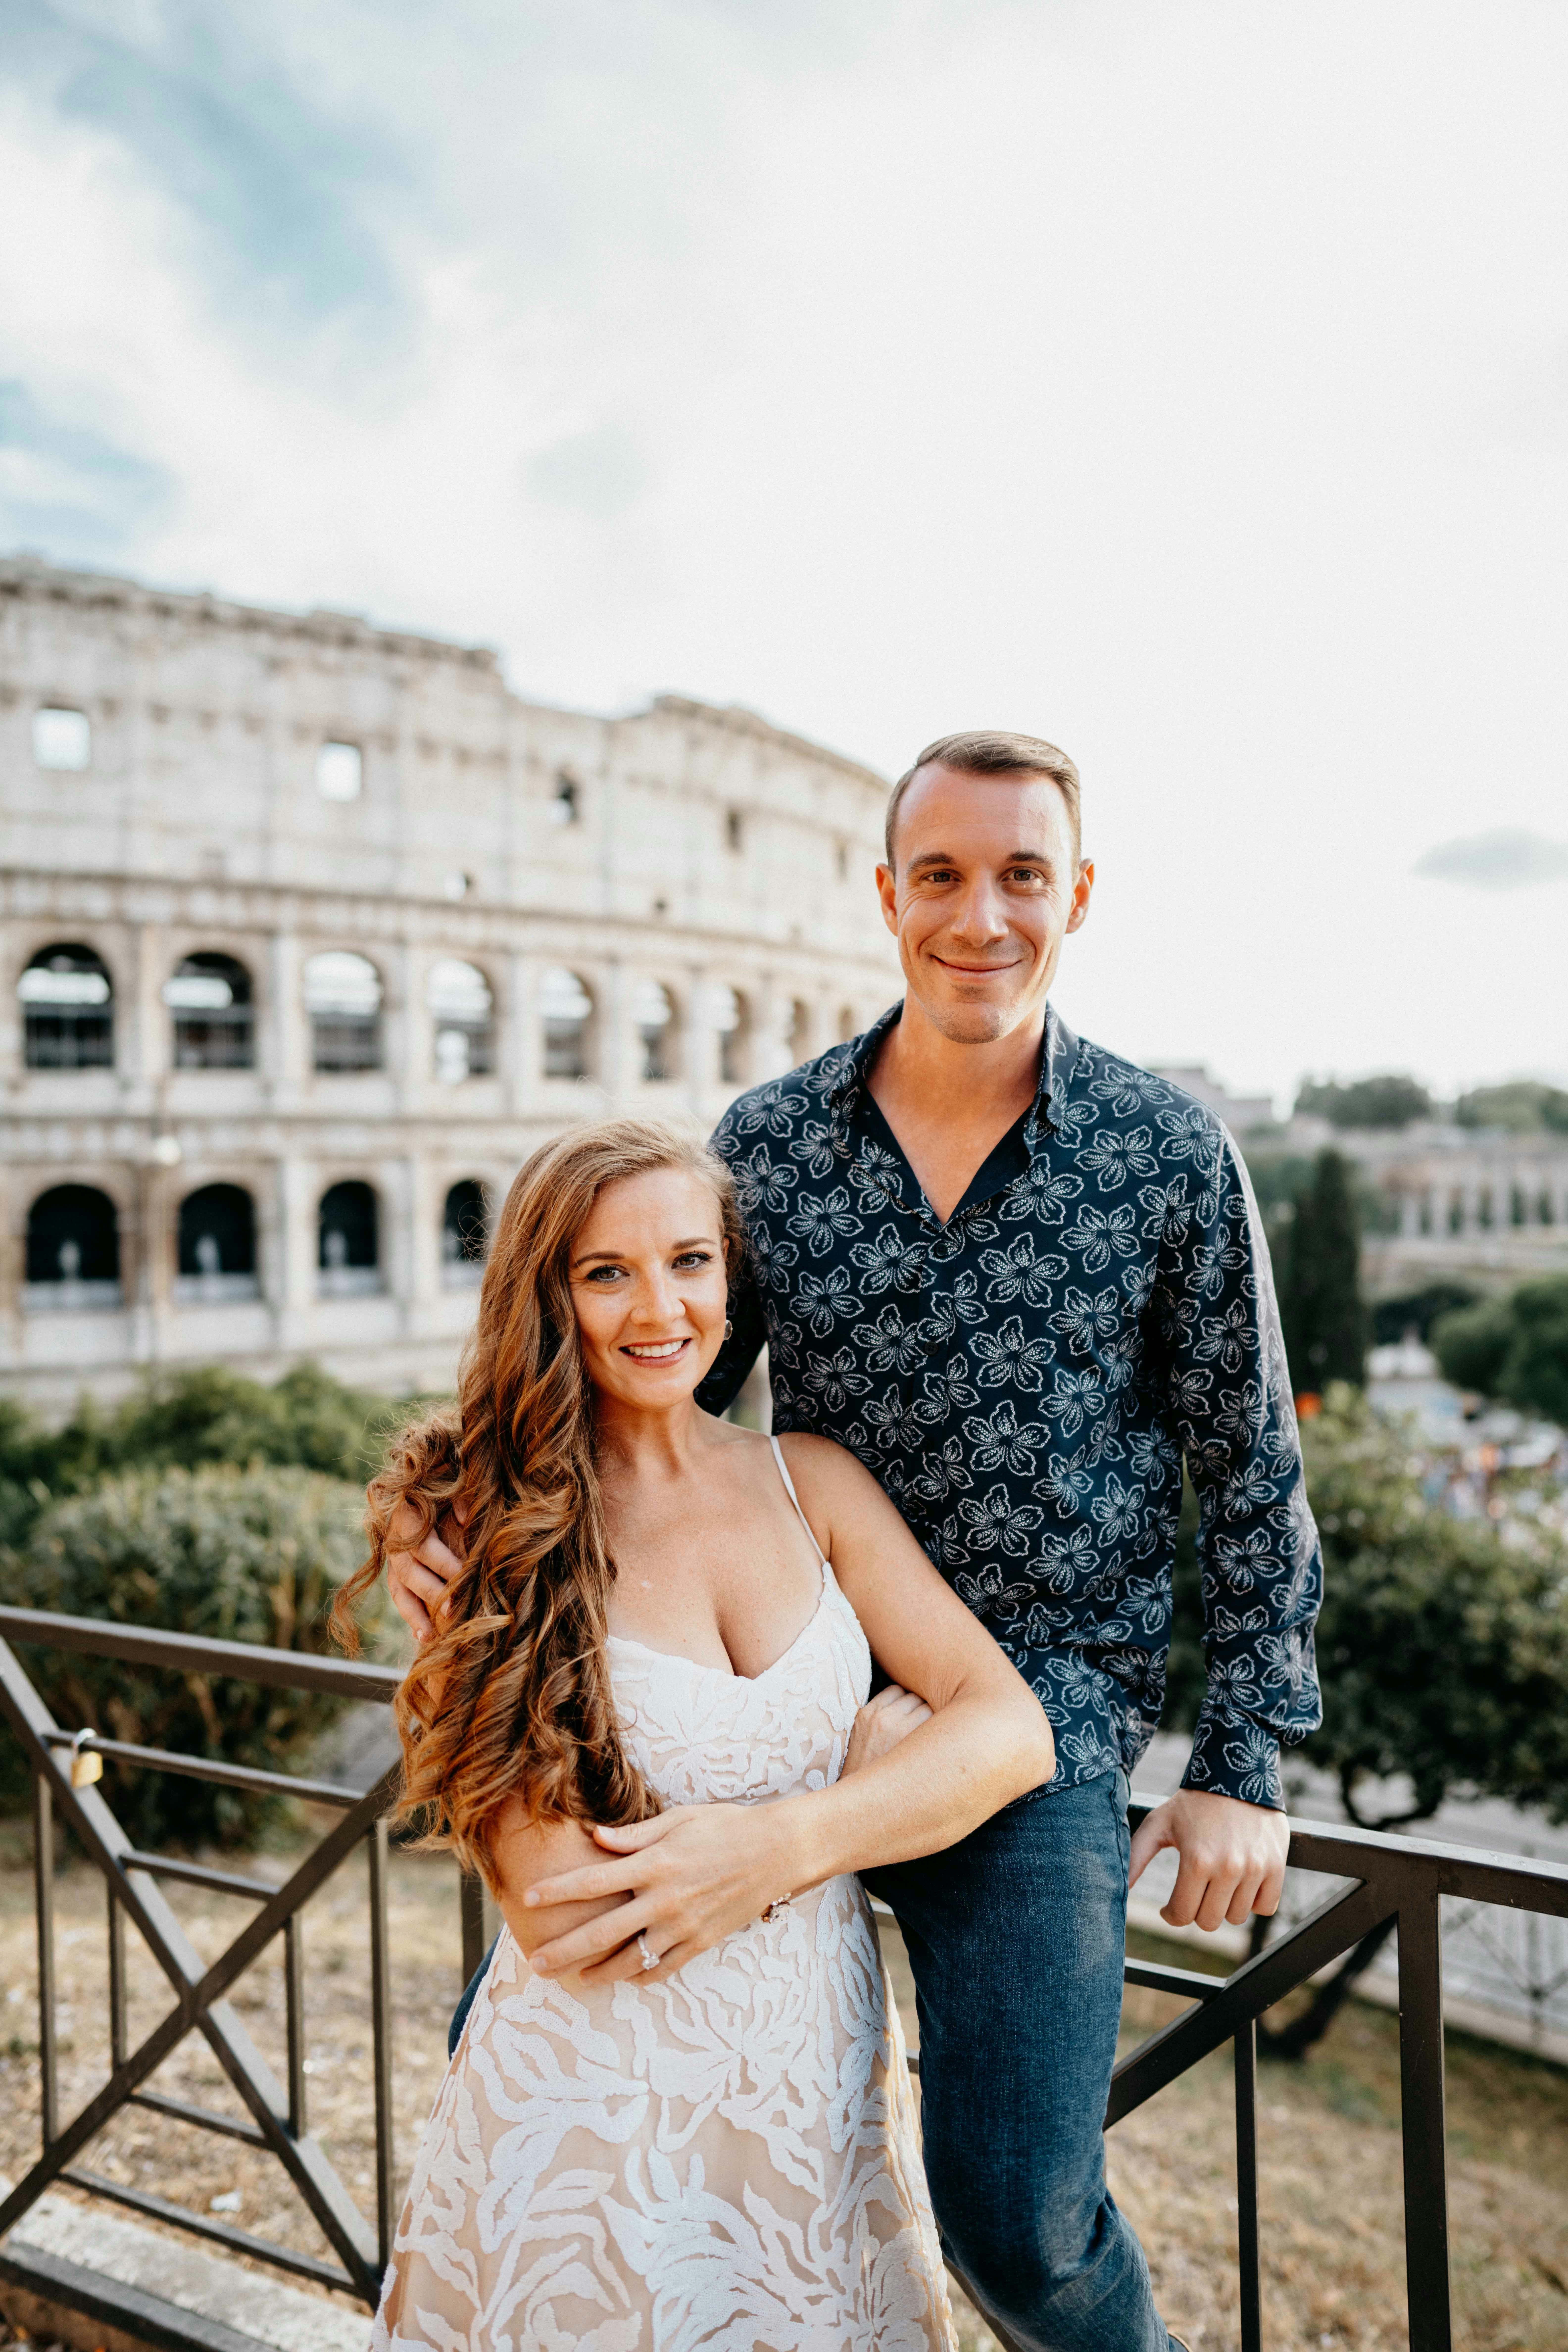 great photo recipe,how to photograph couple in front of the roman colosseum, rome italy. happy couple, smiling couple, couple holding each other. alecia sanfilippo and alex sanfilippo founder of podpros, podpros.com; a man and a woman standing next to each other